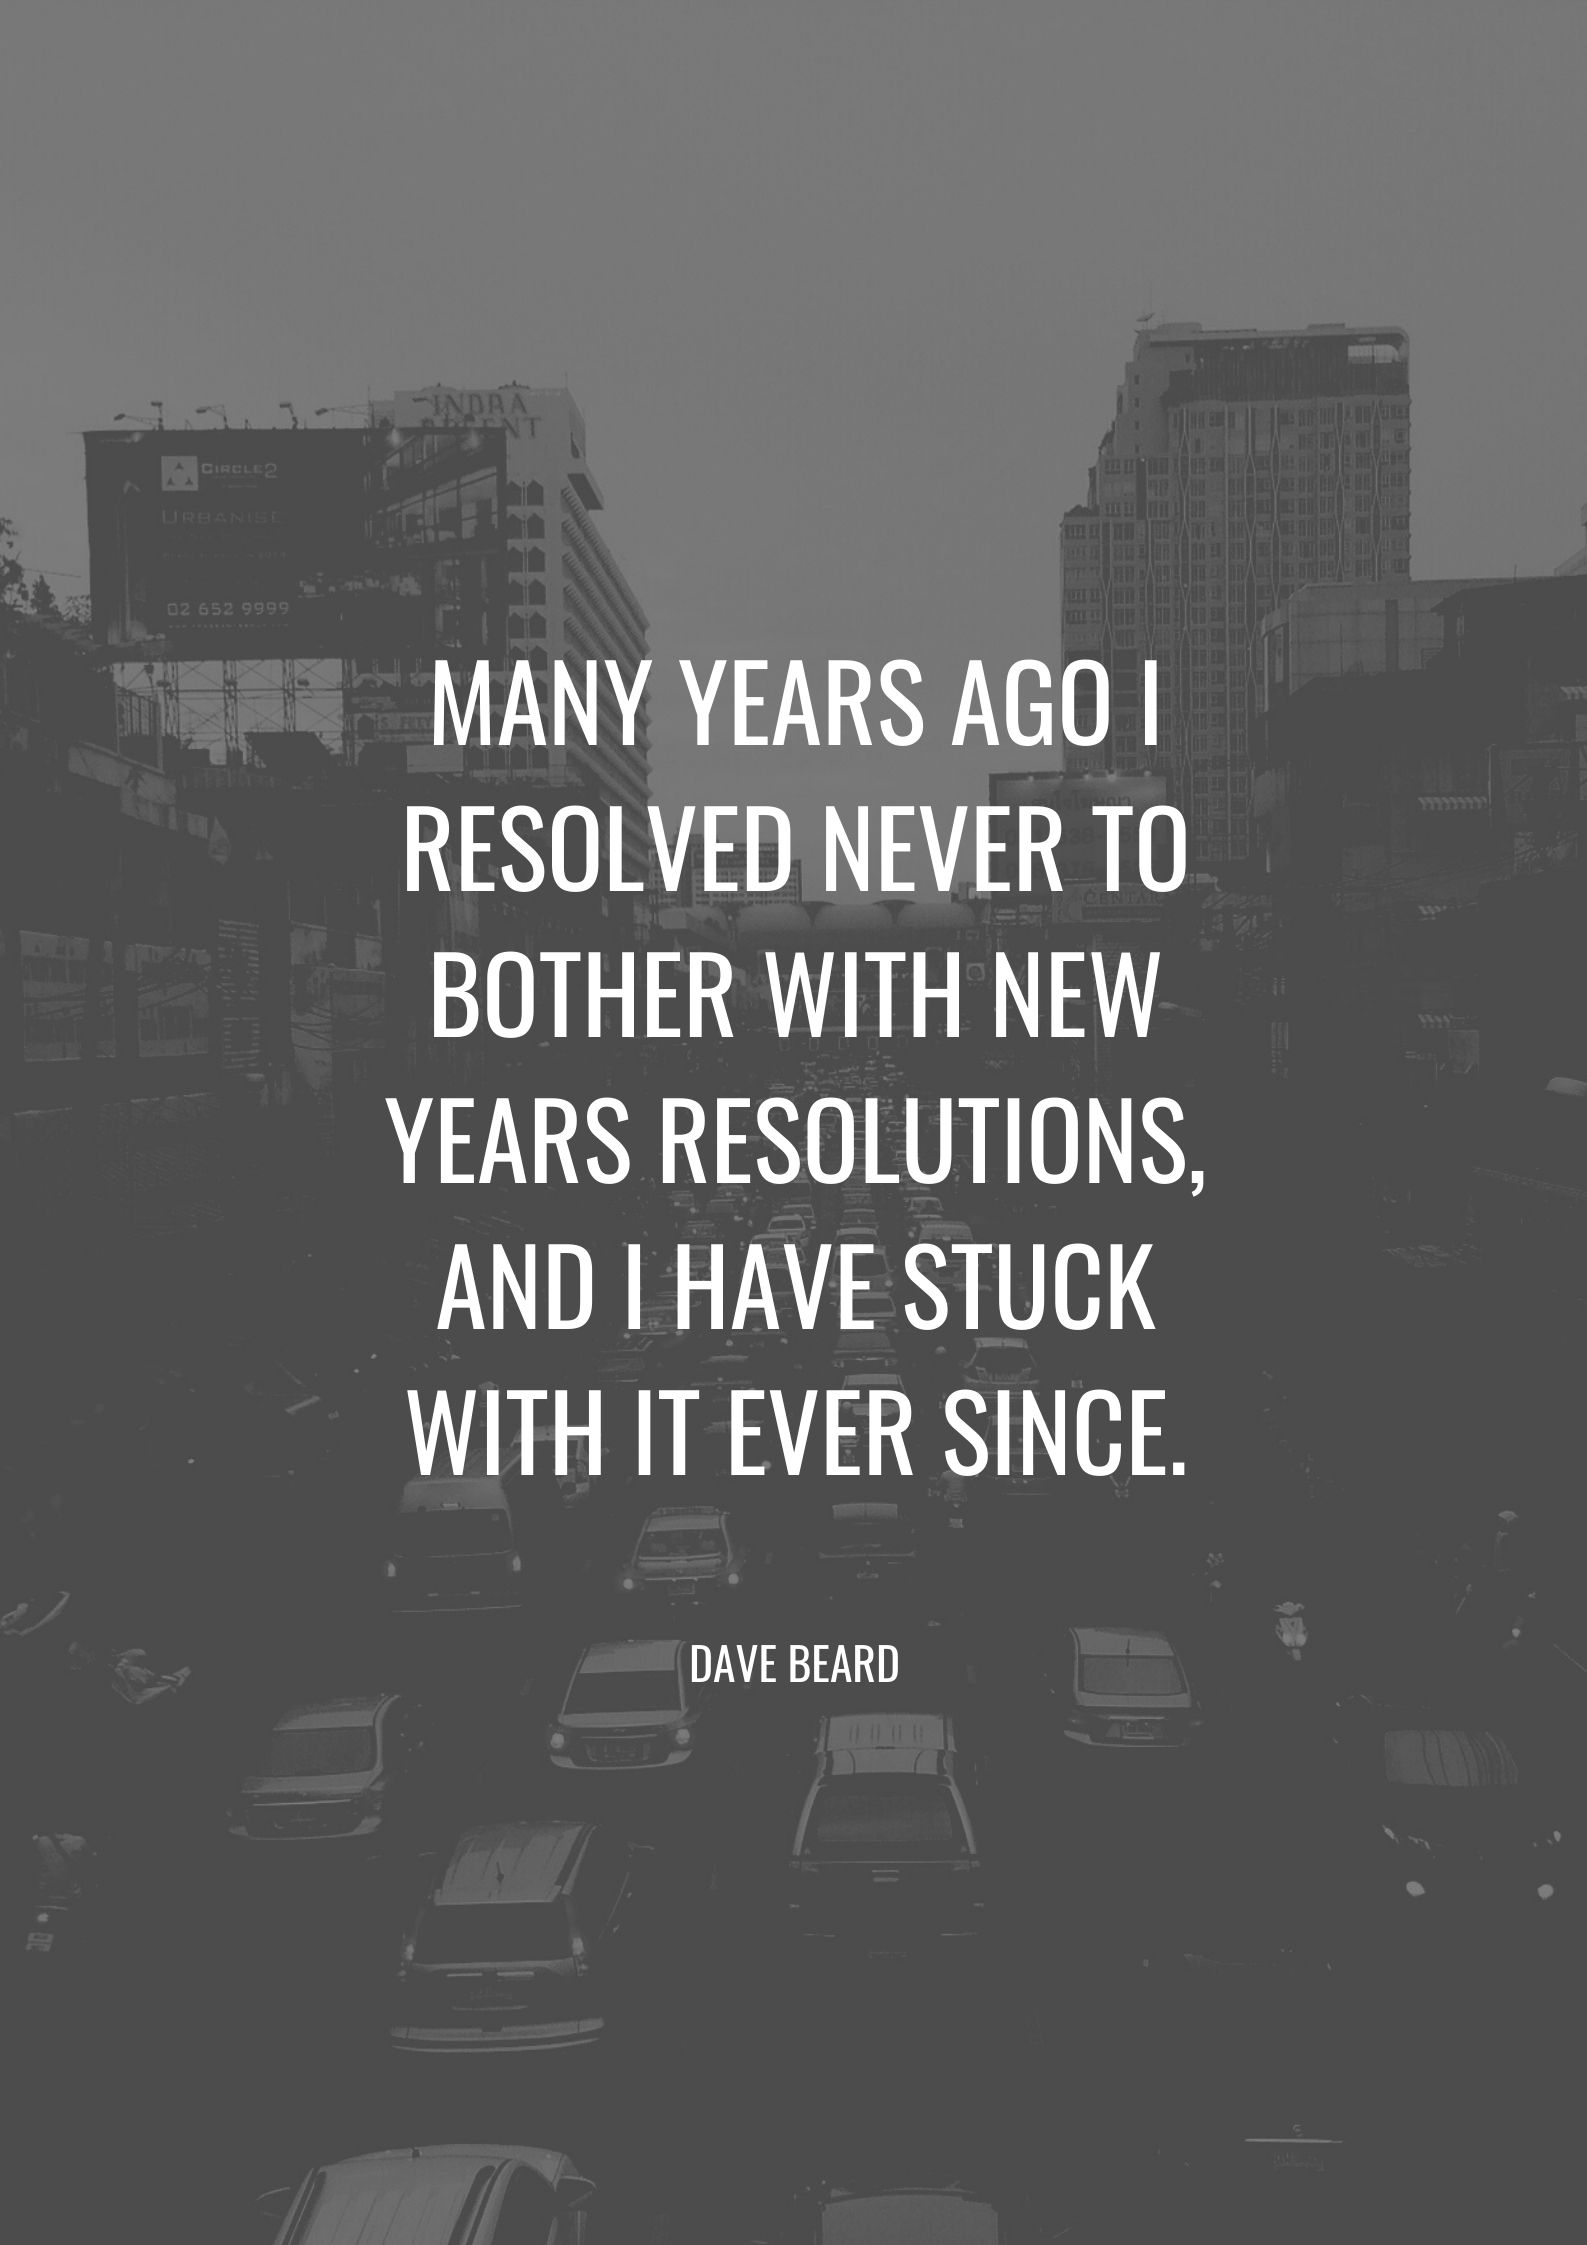 Many years ago I resolved never to bother with New Years resolutions, and I have stuck with it ever since.